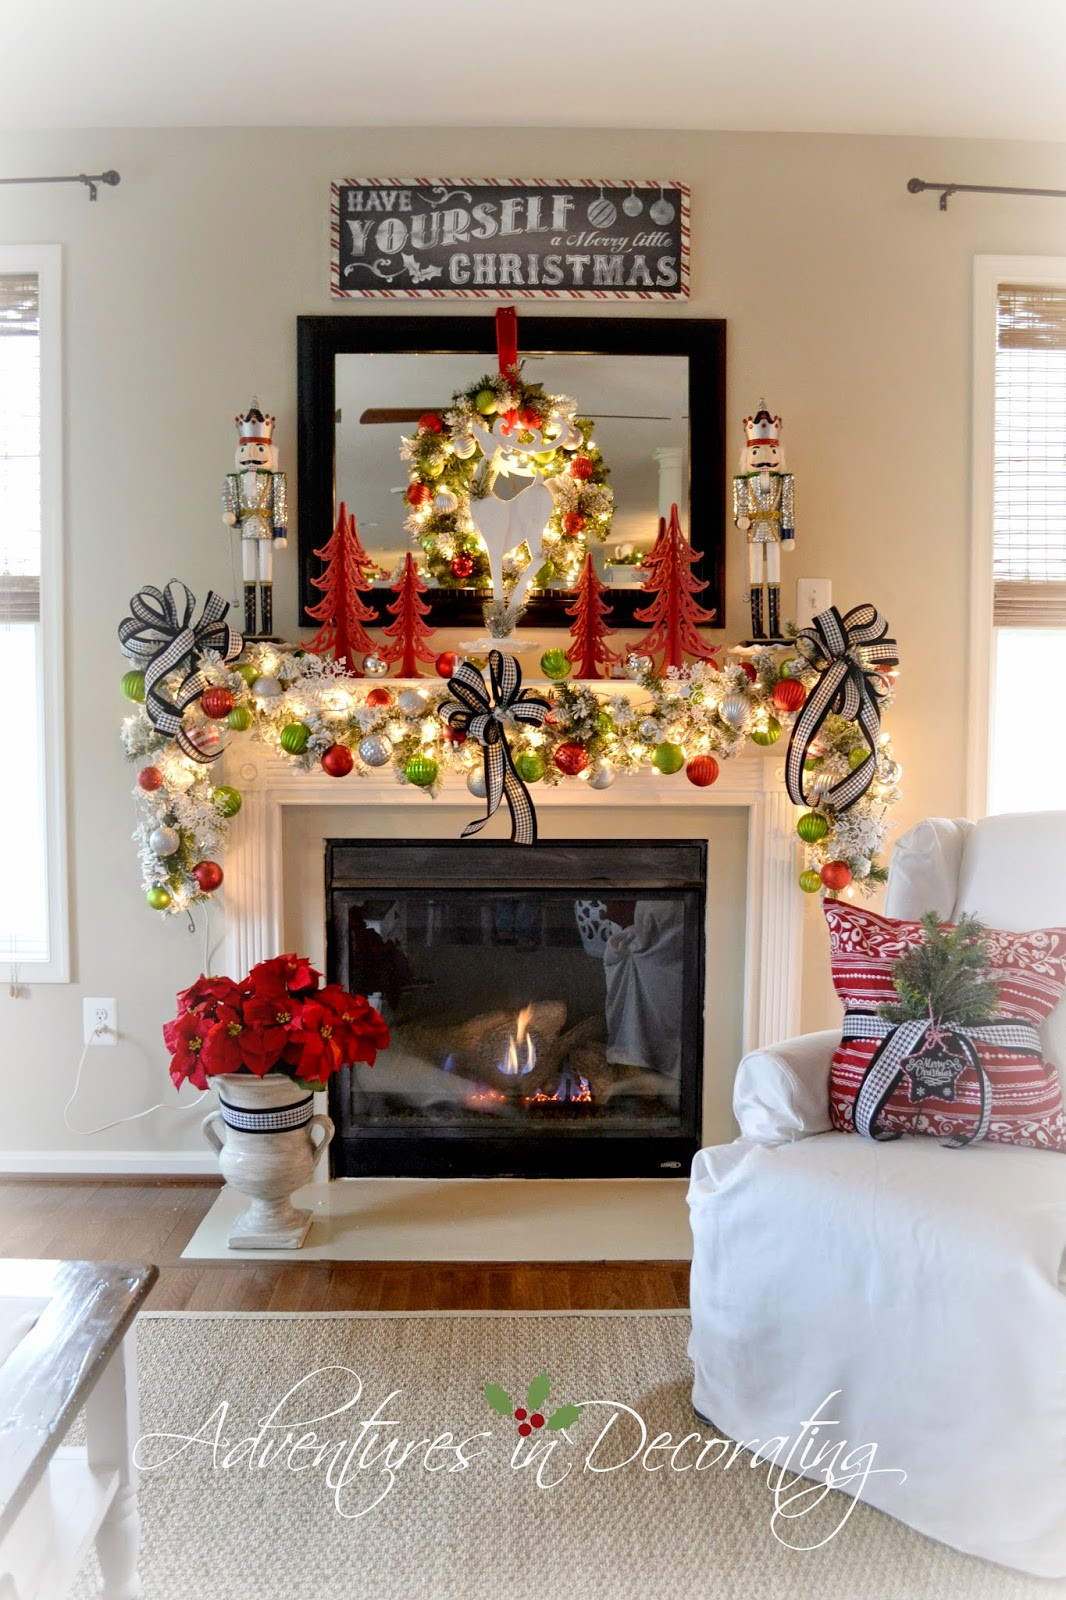 Decorating A Fireplace For Christmas
 Adventures in Decorating Our 2014 Christmas Mantel and